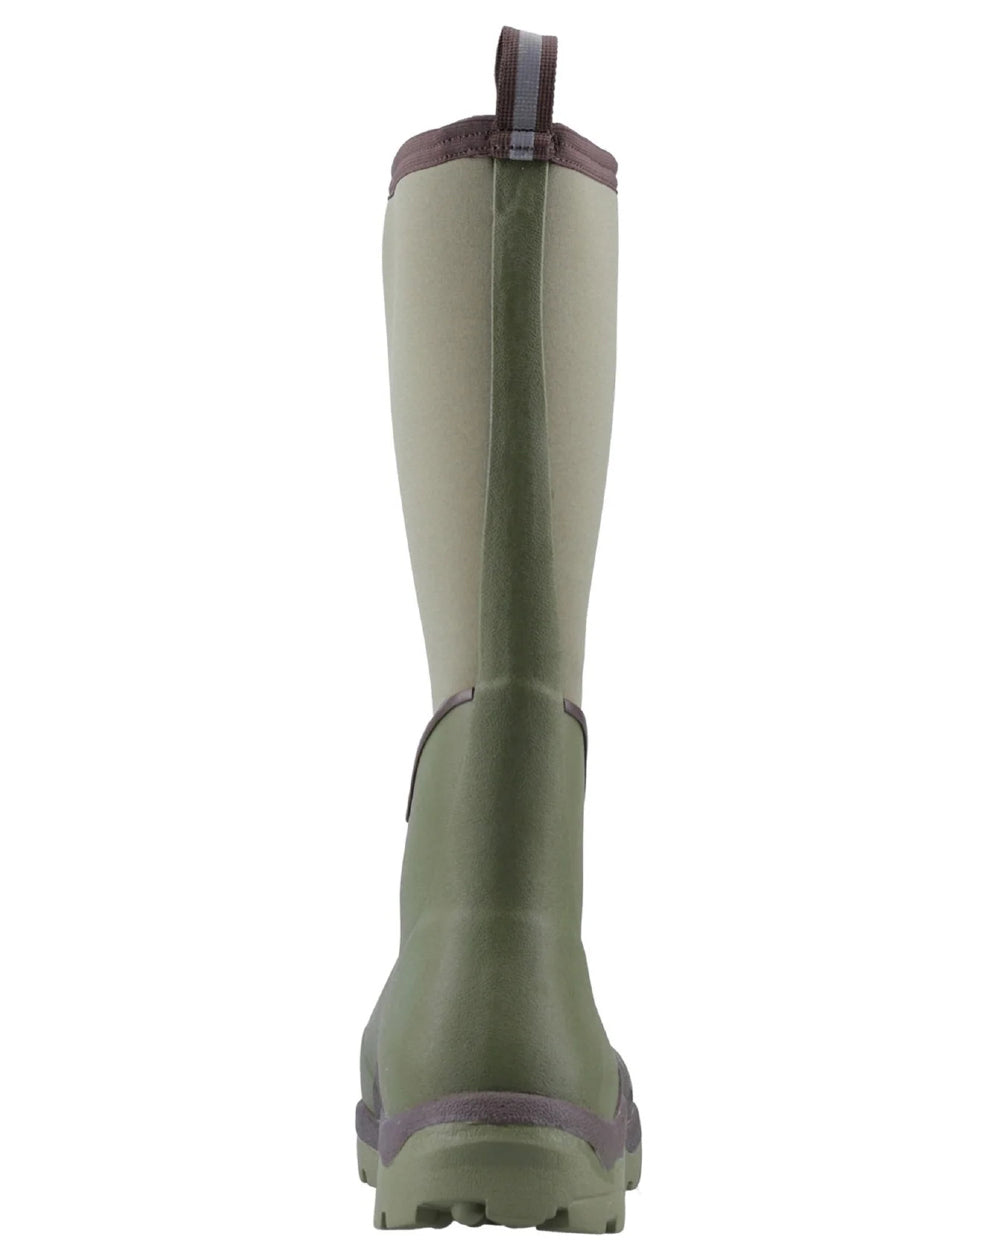 Olive Coloured Muck Boots Unisex Calder Short Boots On A White Background 